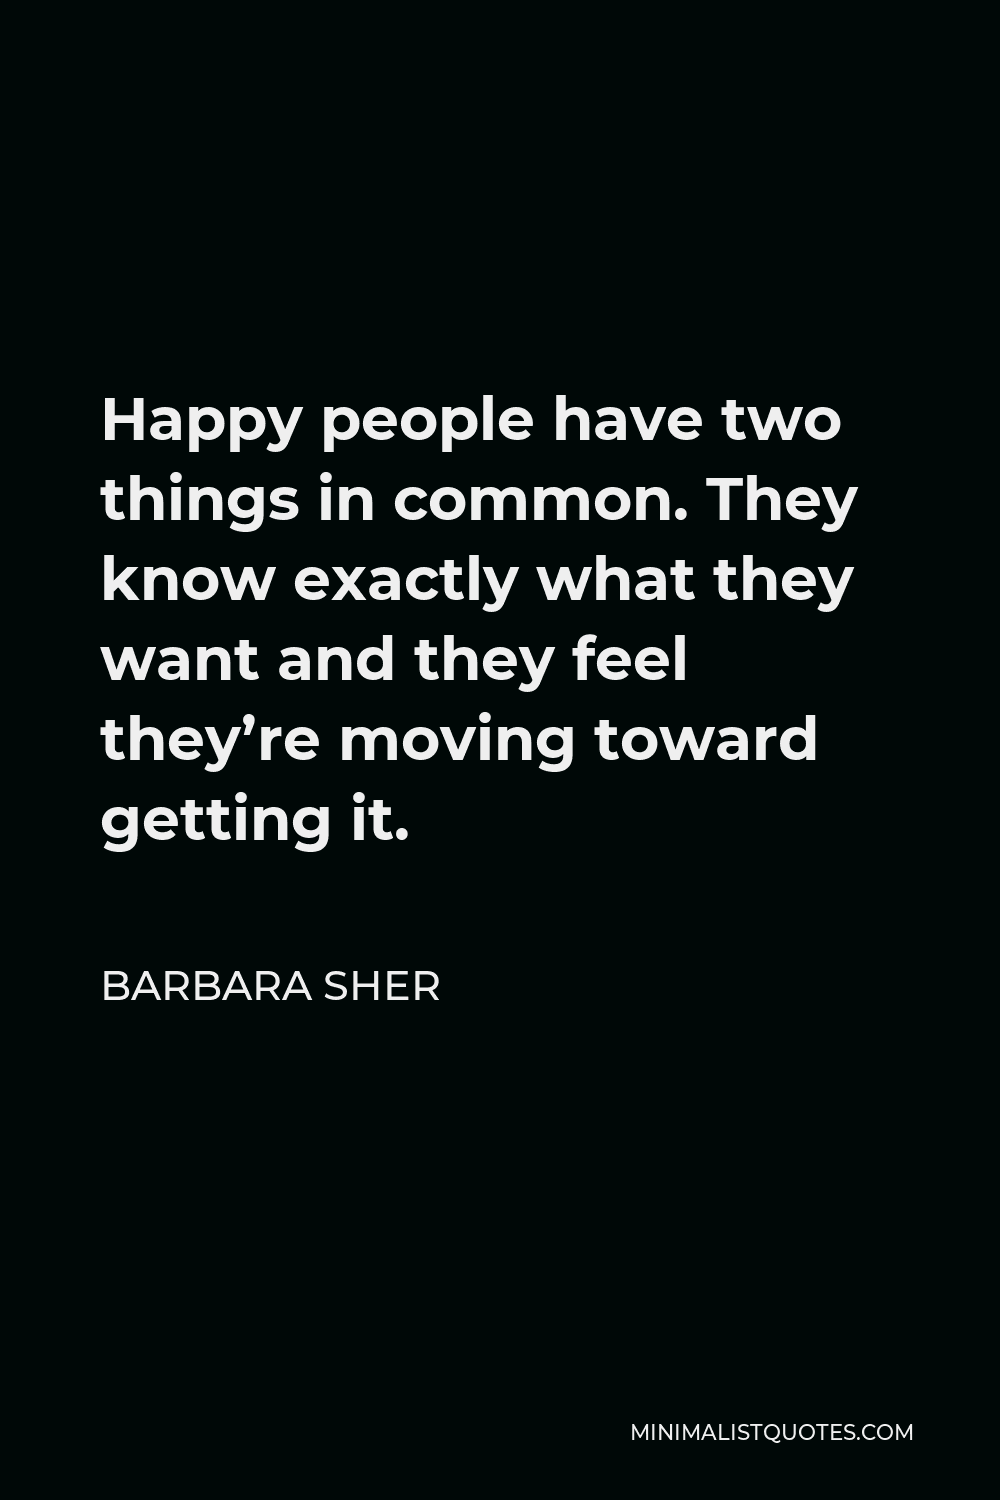 Barbara Sher Quote - Happy people have two things in common. They know exactly what they want and they feel they’re moving toward getting it.